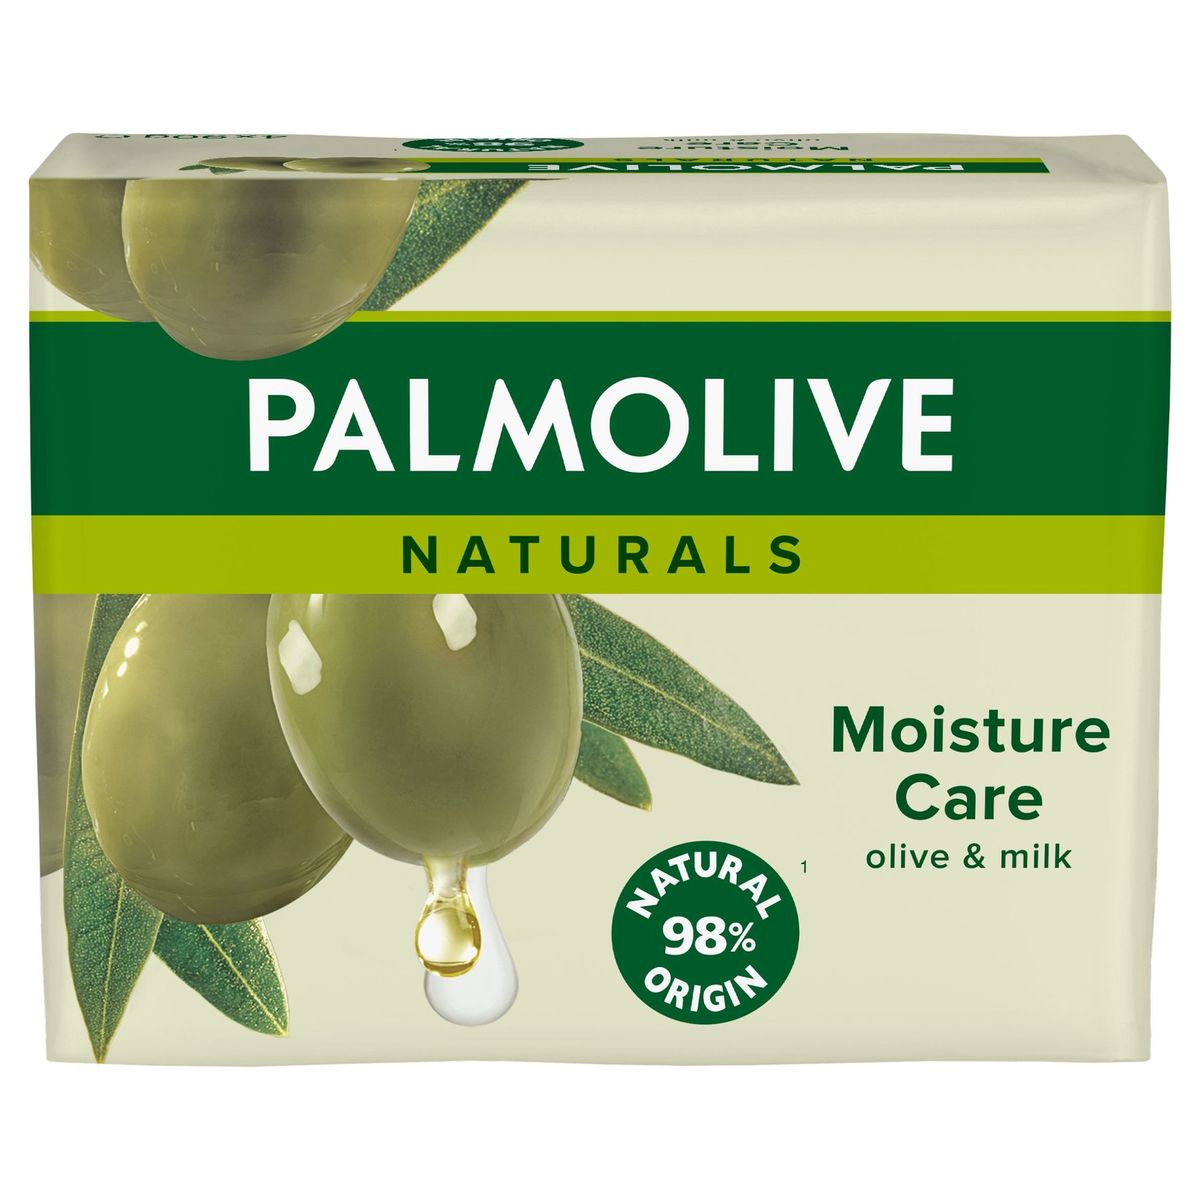 Palmolive Naturals Moisture Care with Olive Savon Solide 4 x 90 g